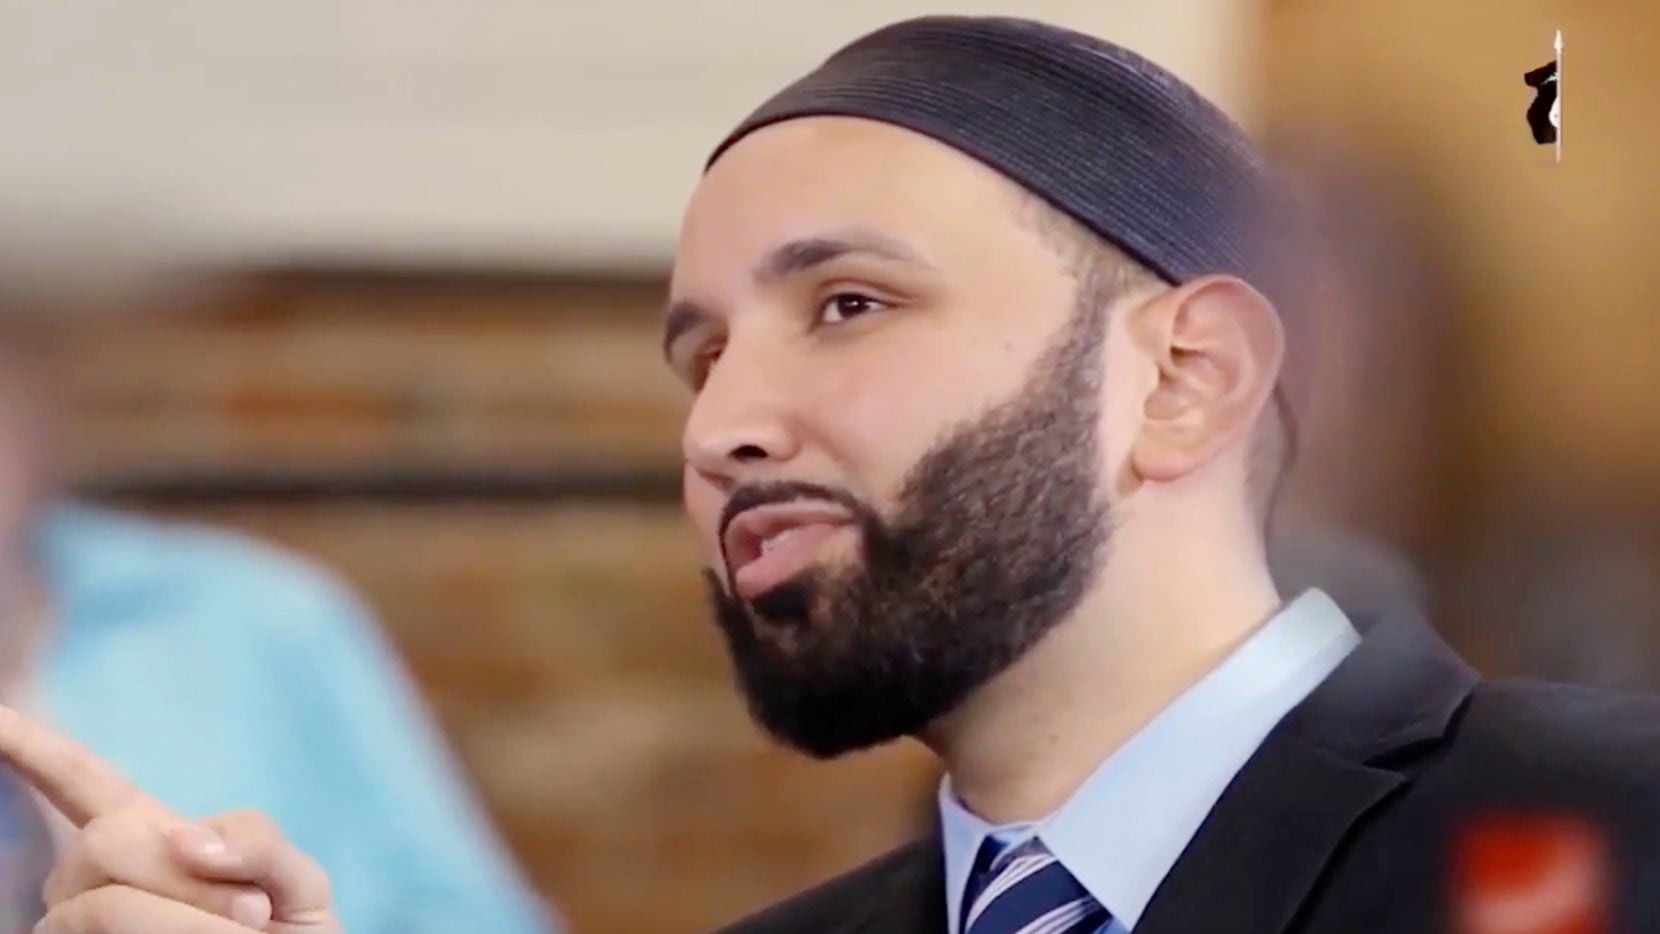 Imam Omar Suleiman was shown in an ISIS video that appeared online making threats against...